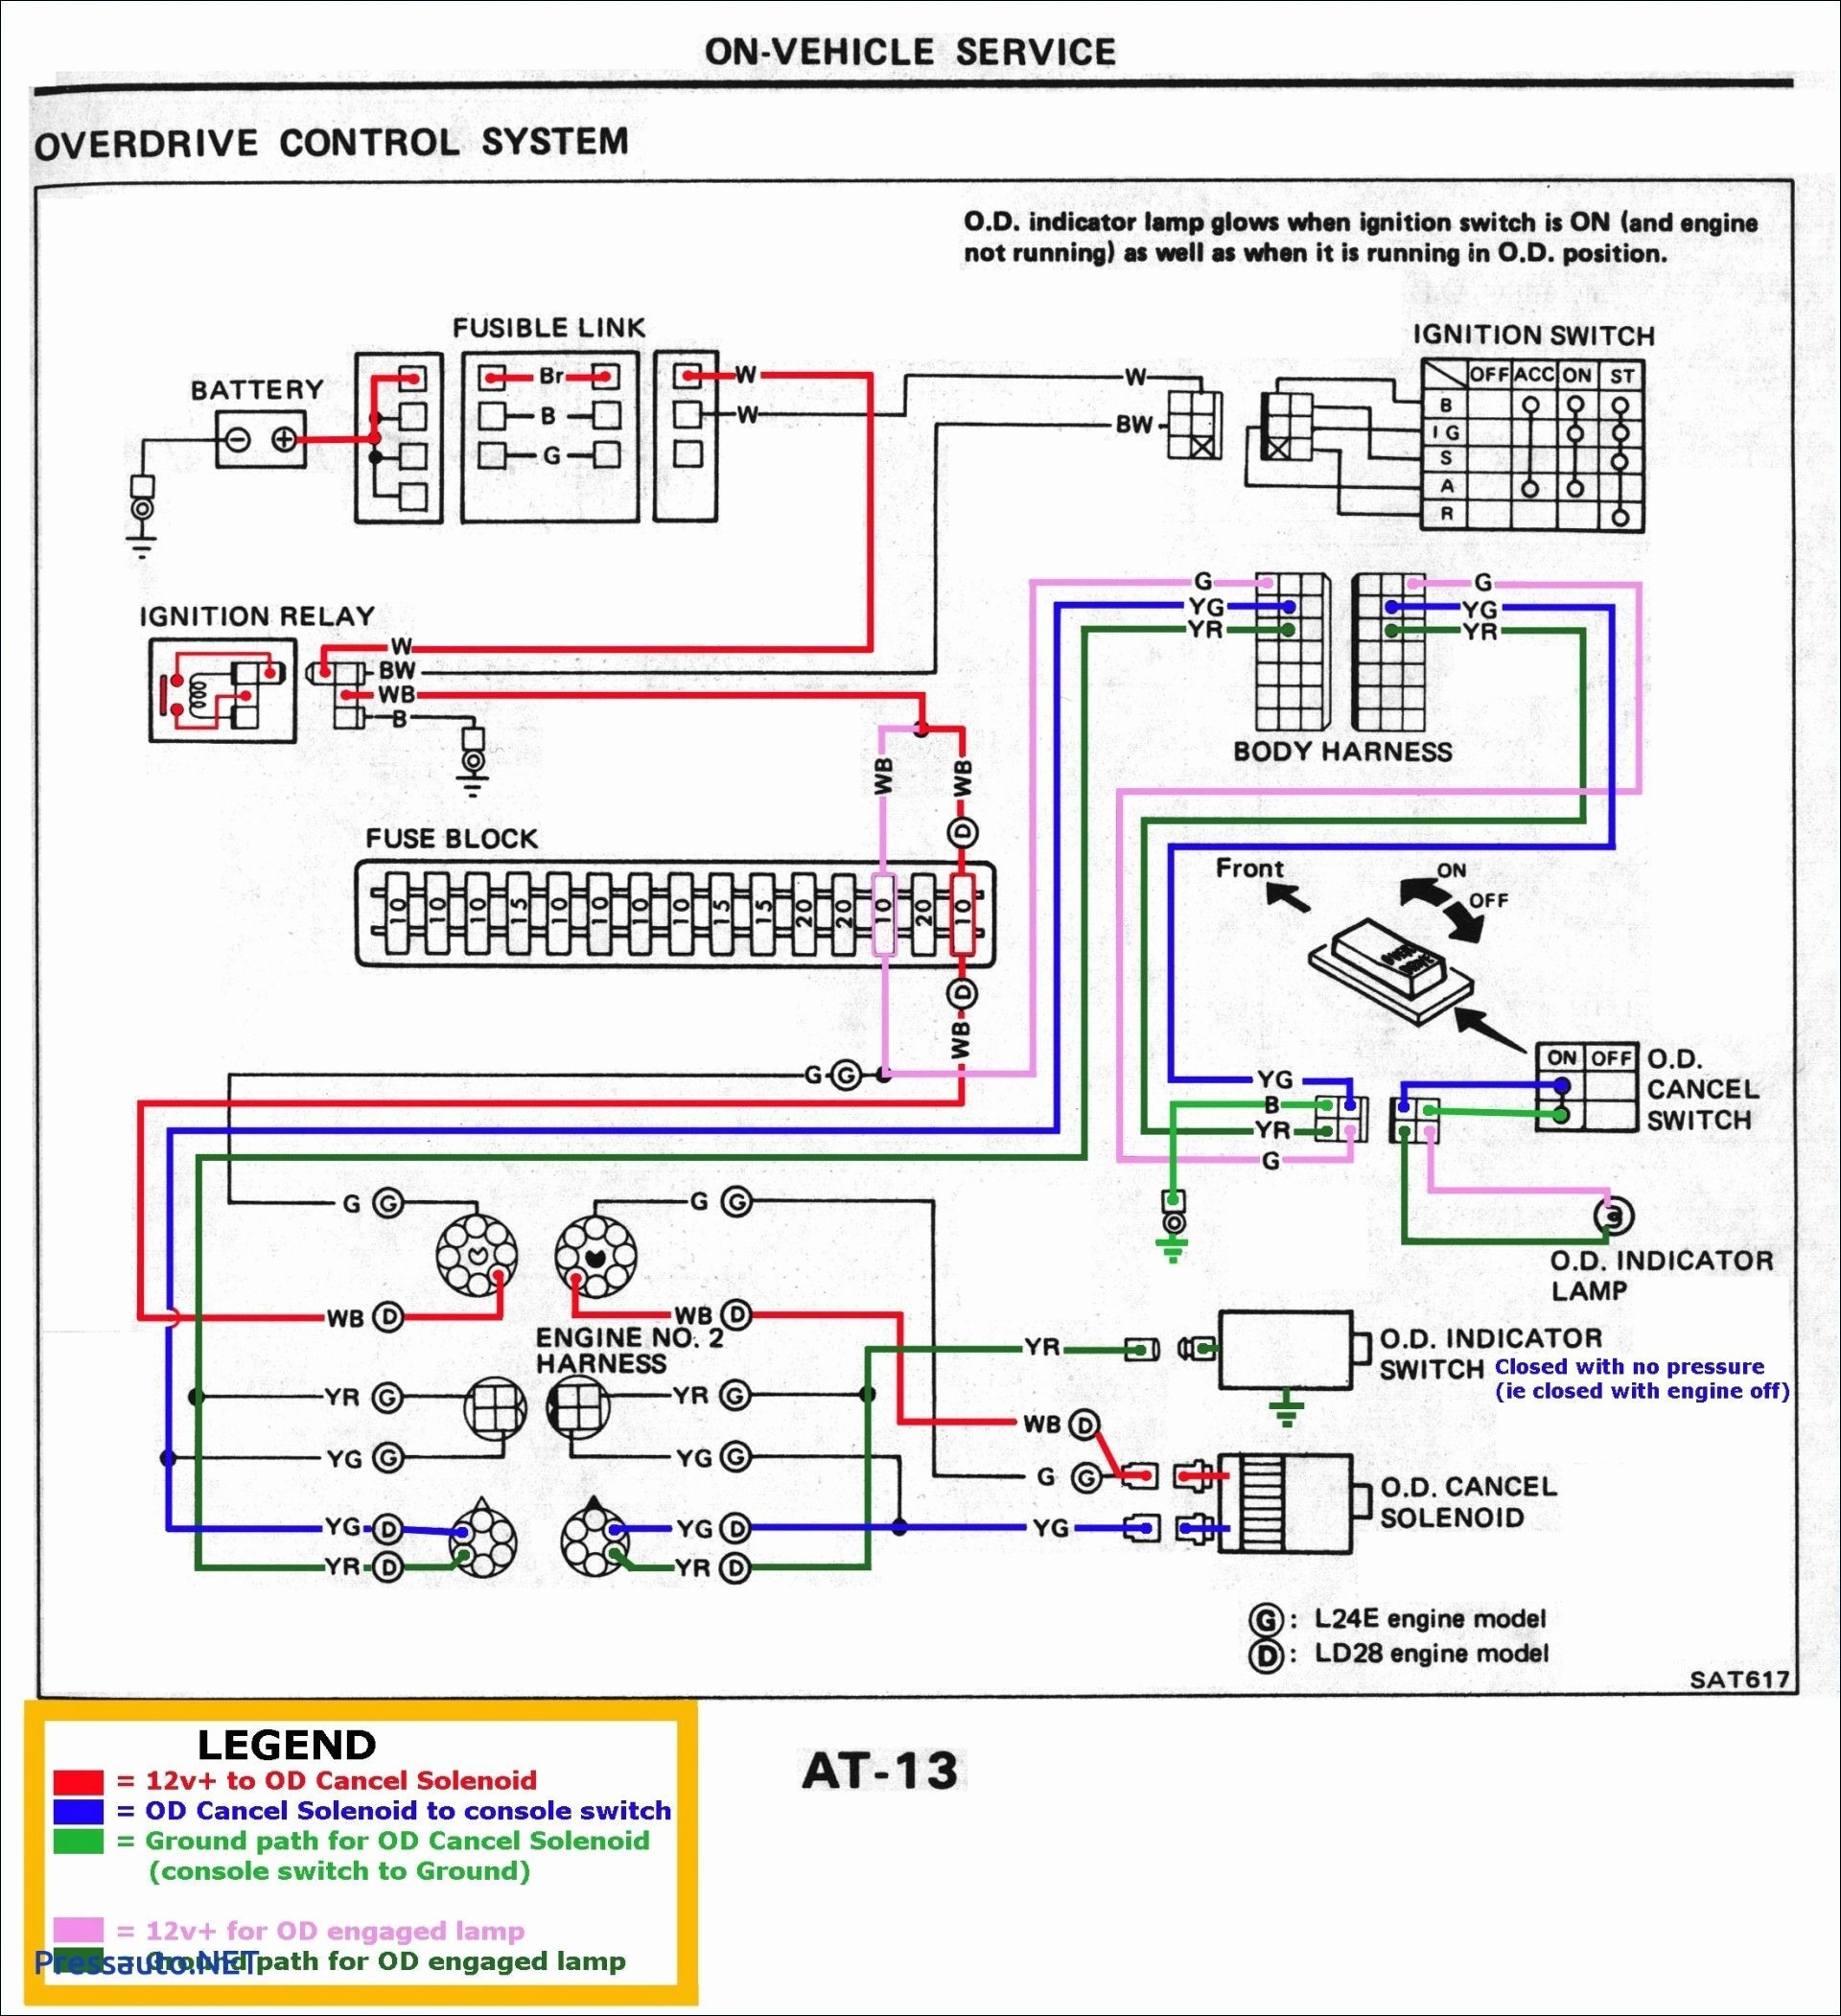 Wiring Diagram for Kc Lights Refrence Wiring Diagram Relay F Road Lights Fresh Wiring Diagram Relay